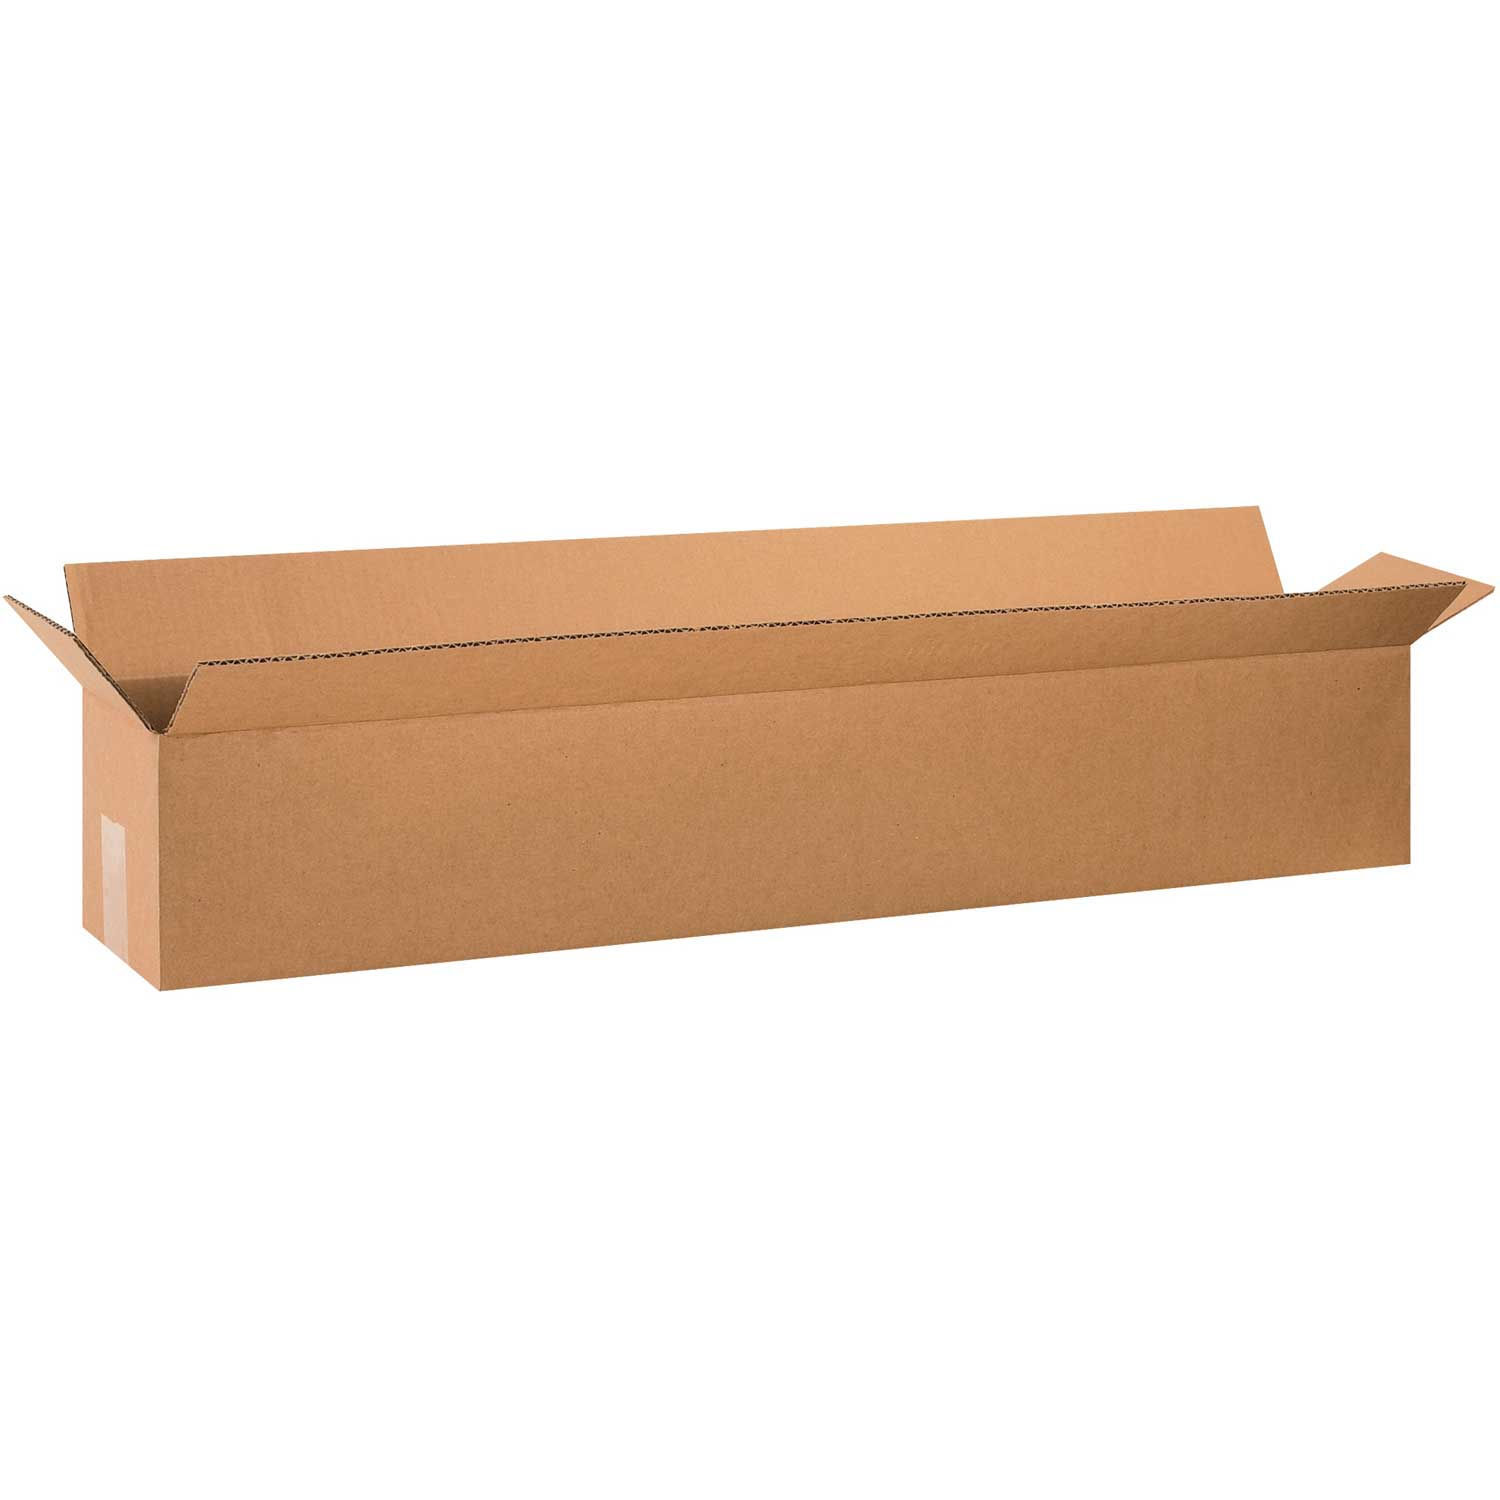 12 x 8 x 6 Cardboard Corrugated Boxes 65 lbs Capacity 200#//ECT-32 Lot Of 25